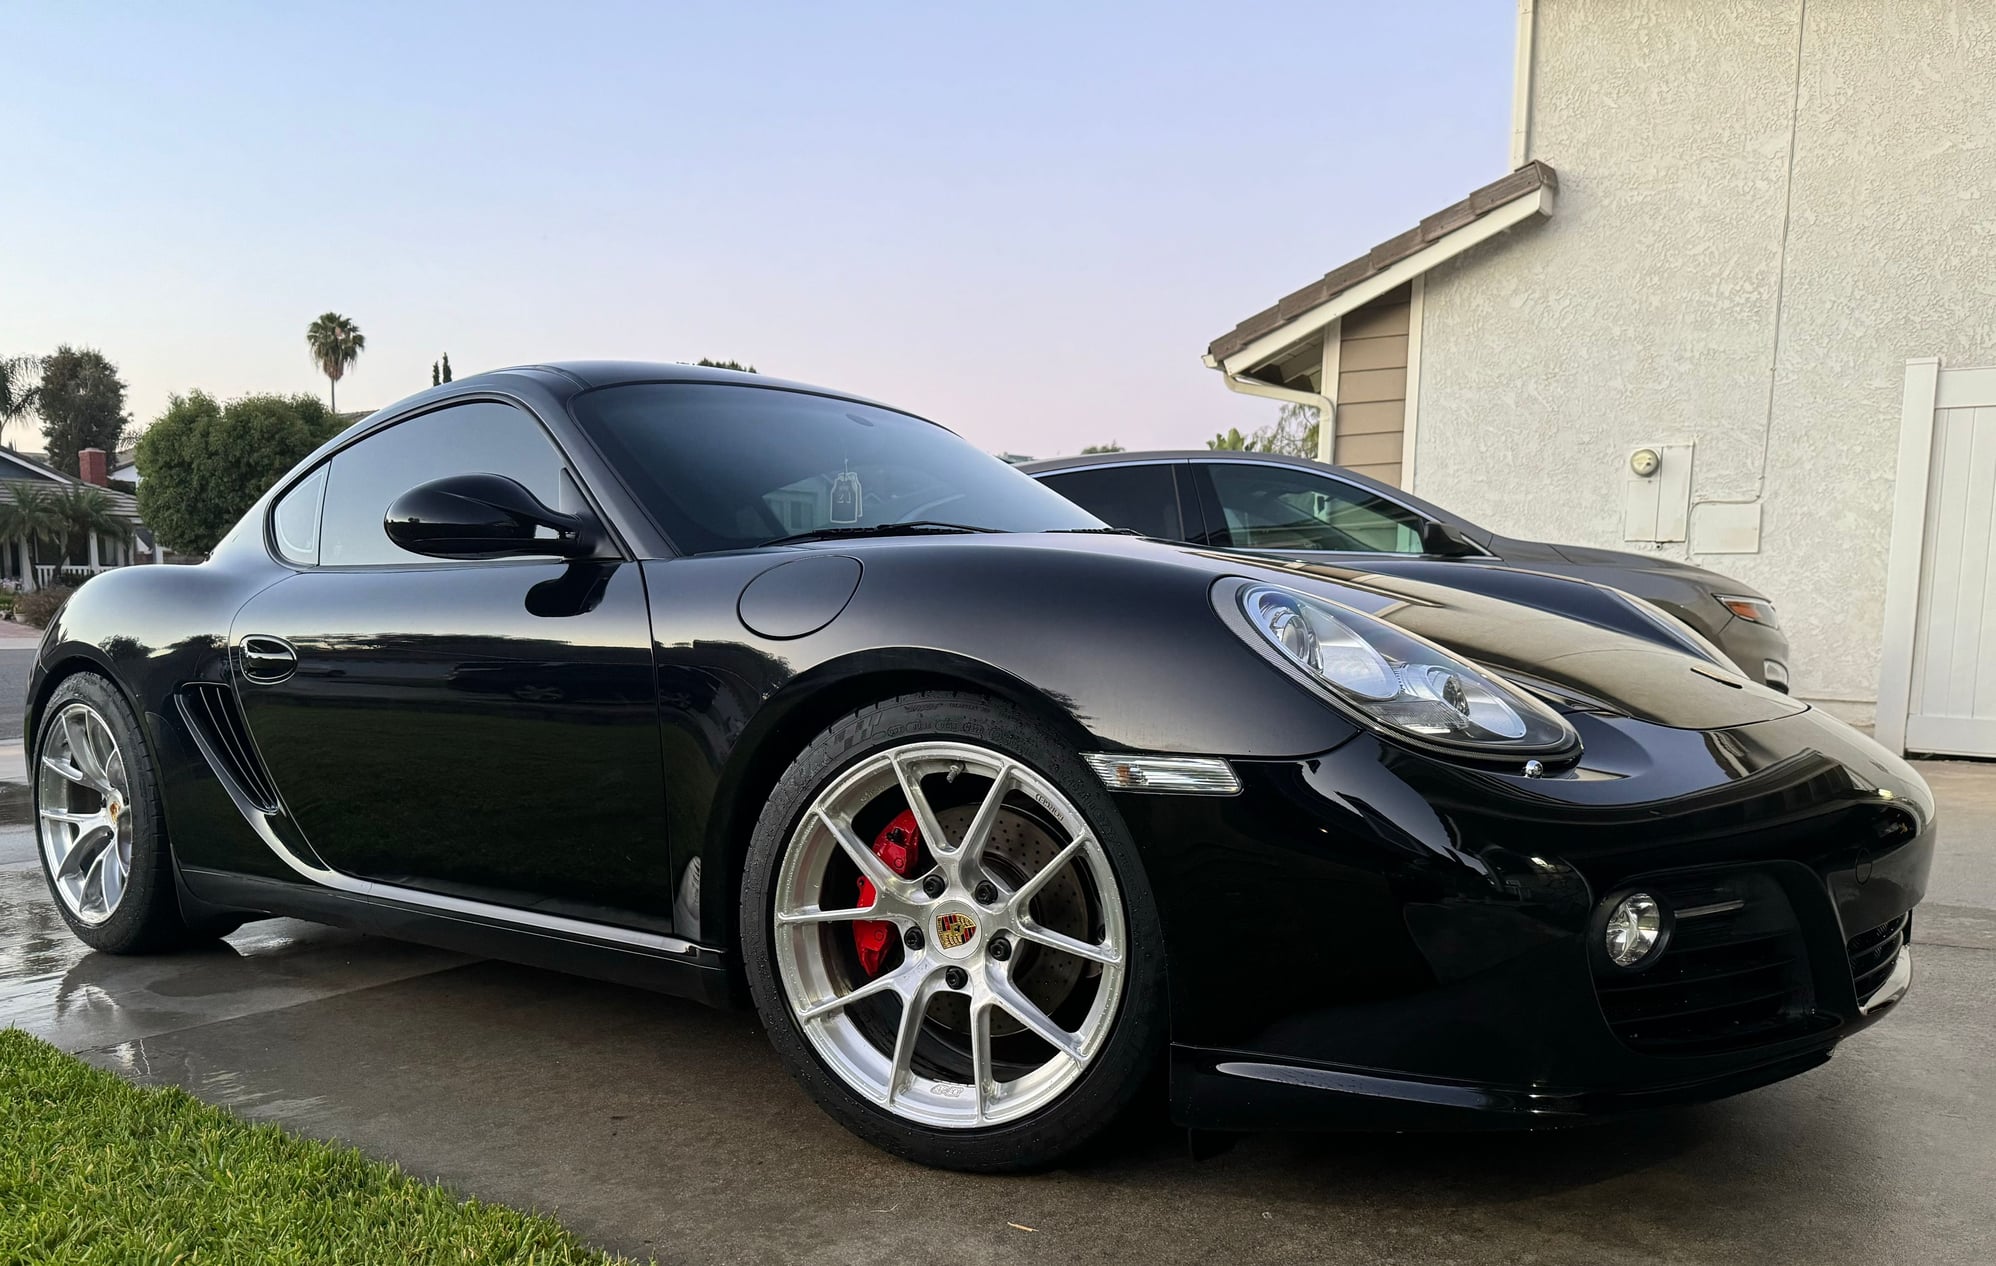 2009 Porsche Cayman - 2009 Porsche Cayman S (Manual) SOCAL - Used - VIN WP0AB29839U780536 - 91,000 Miles - 6 cyl - 2WD - Manual - Coupe - Black - Brea, CA 92886, United States